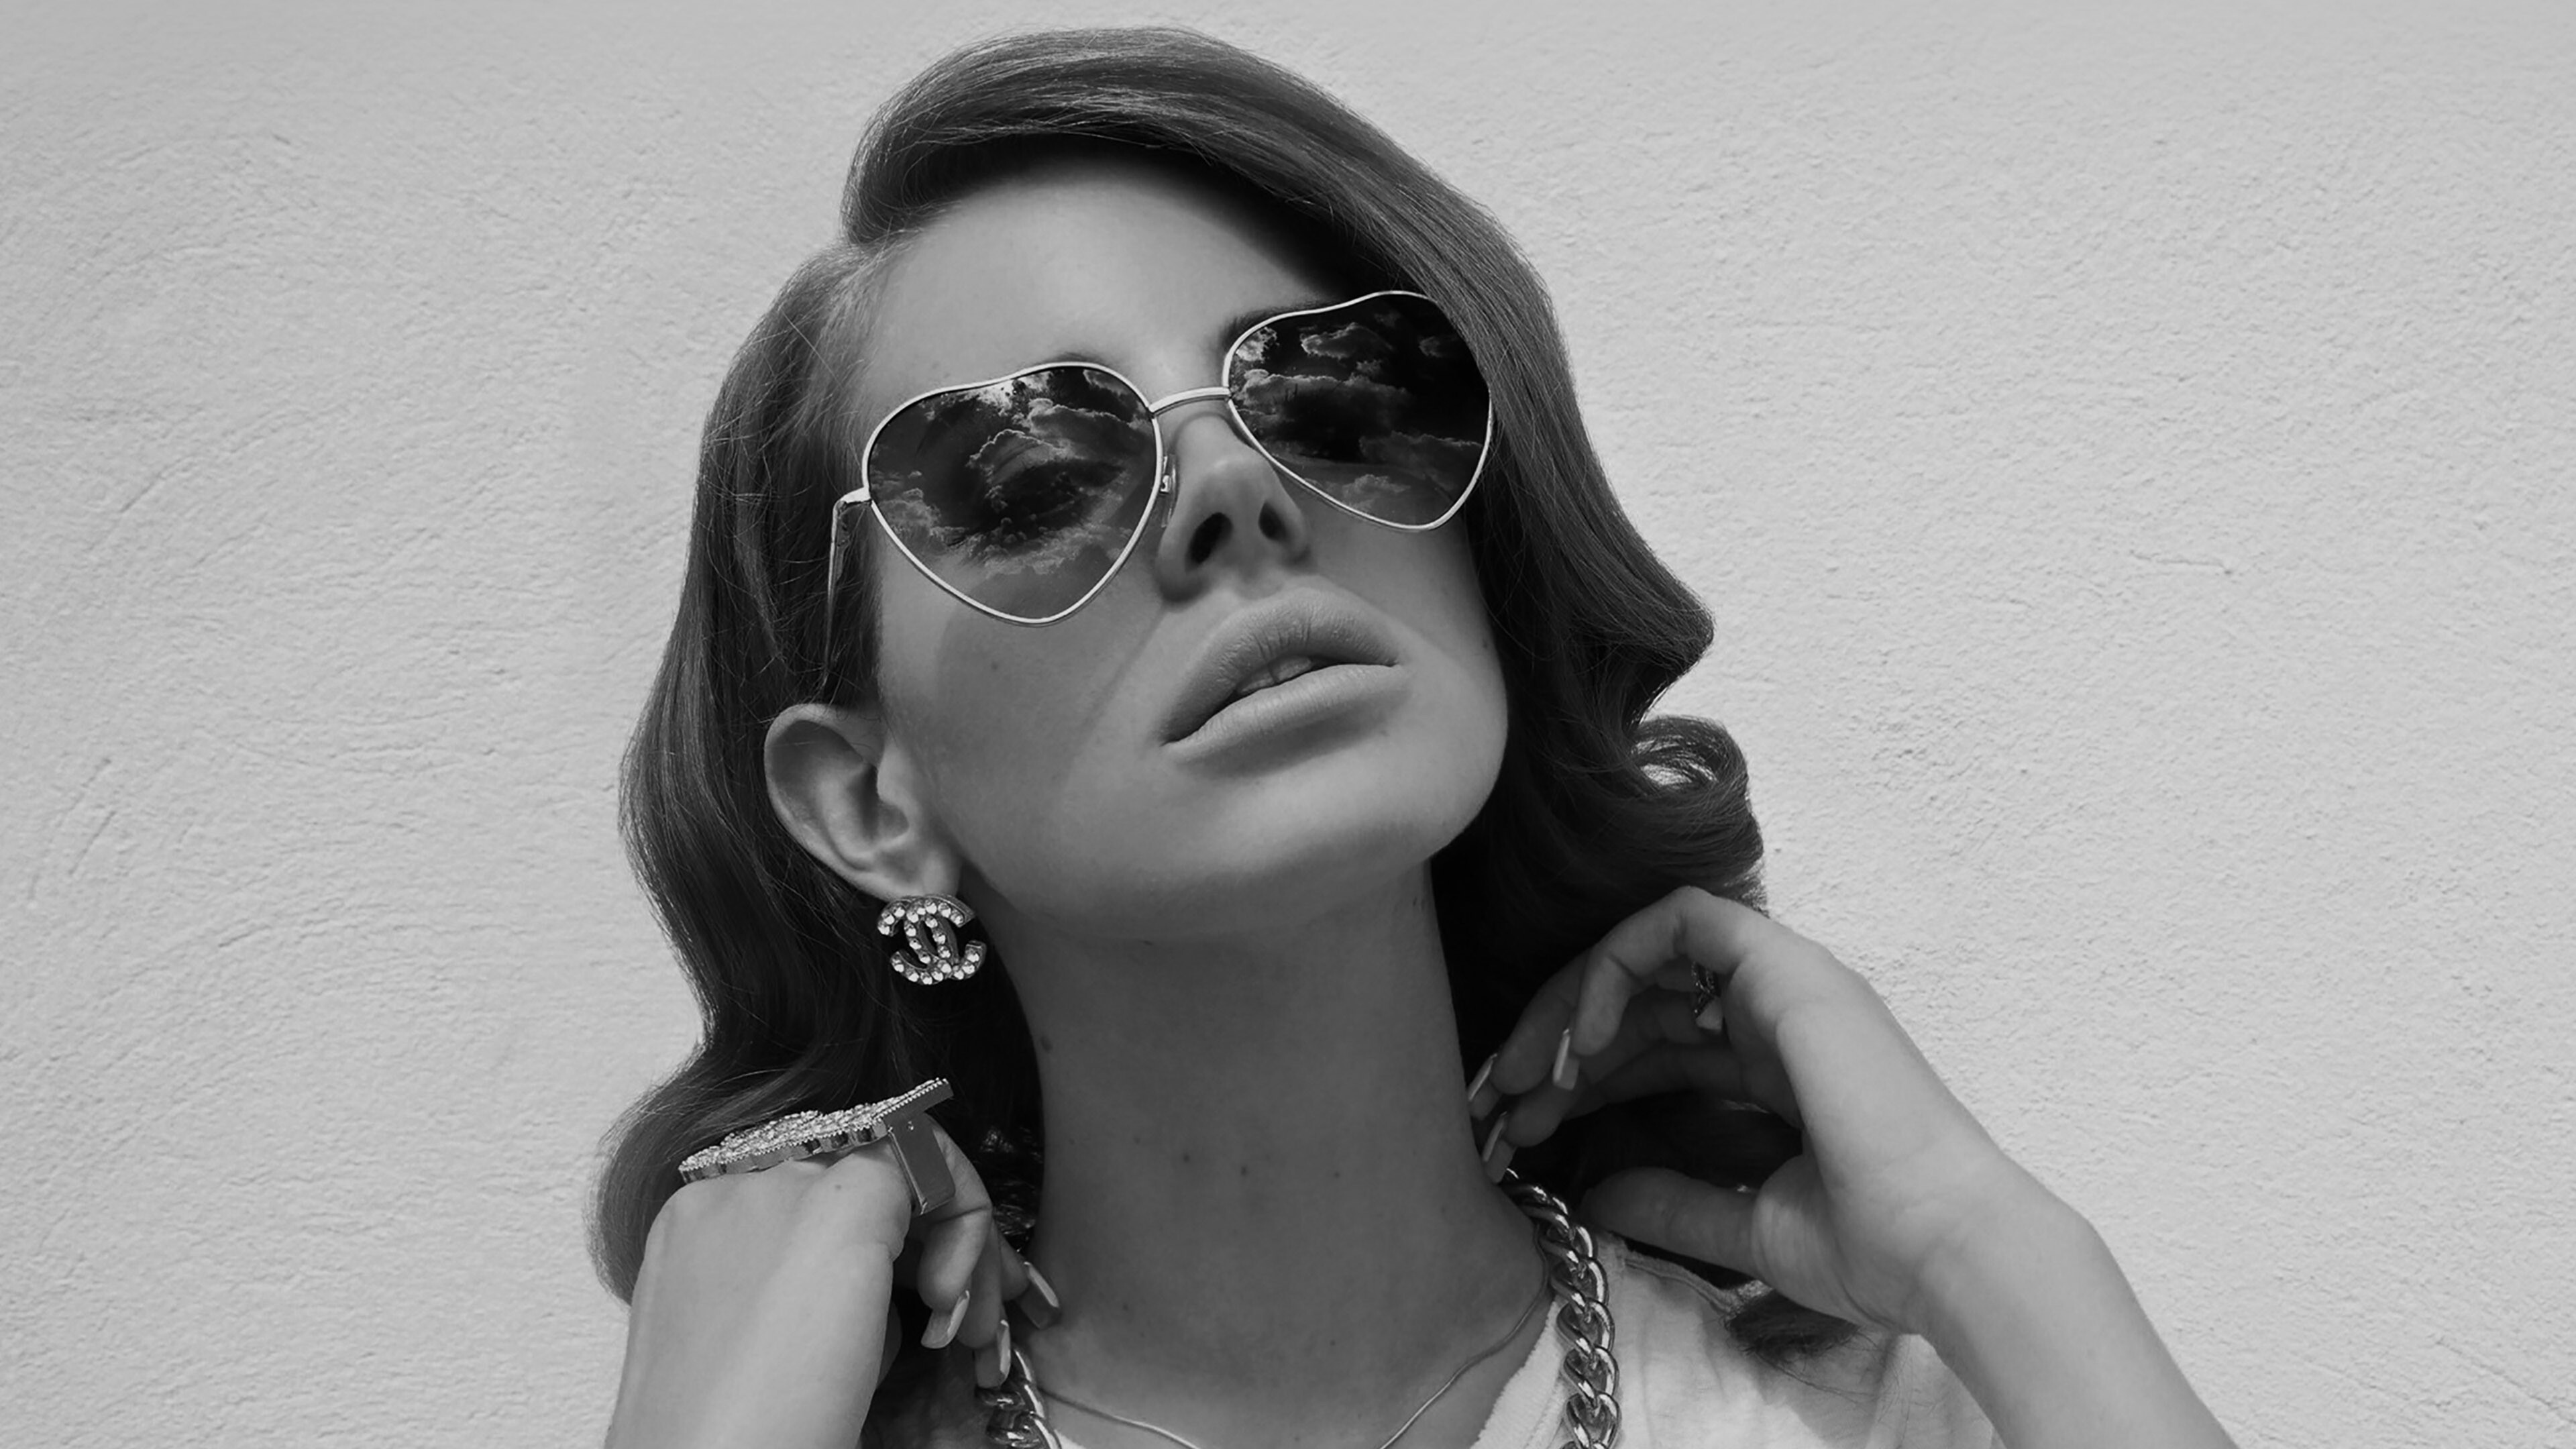 Lana Del Rey: American songwriter, record producer, Lust for Life. 3840x2160 4K Background.